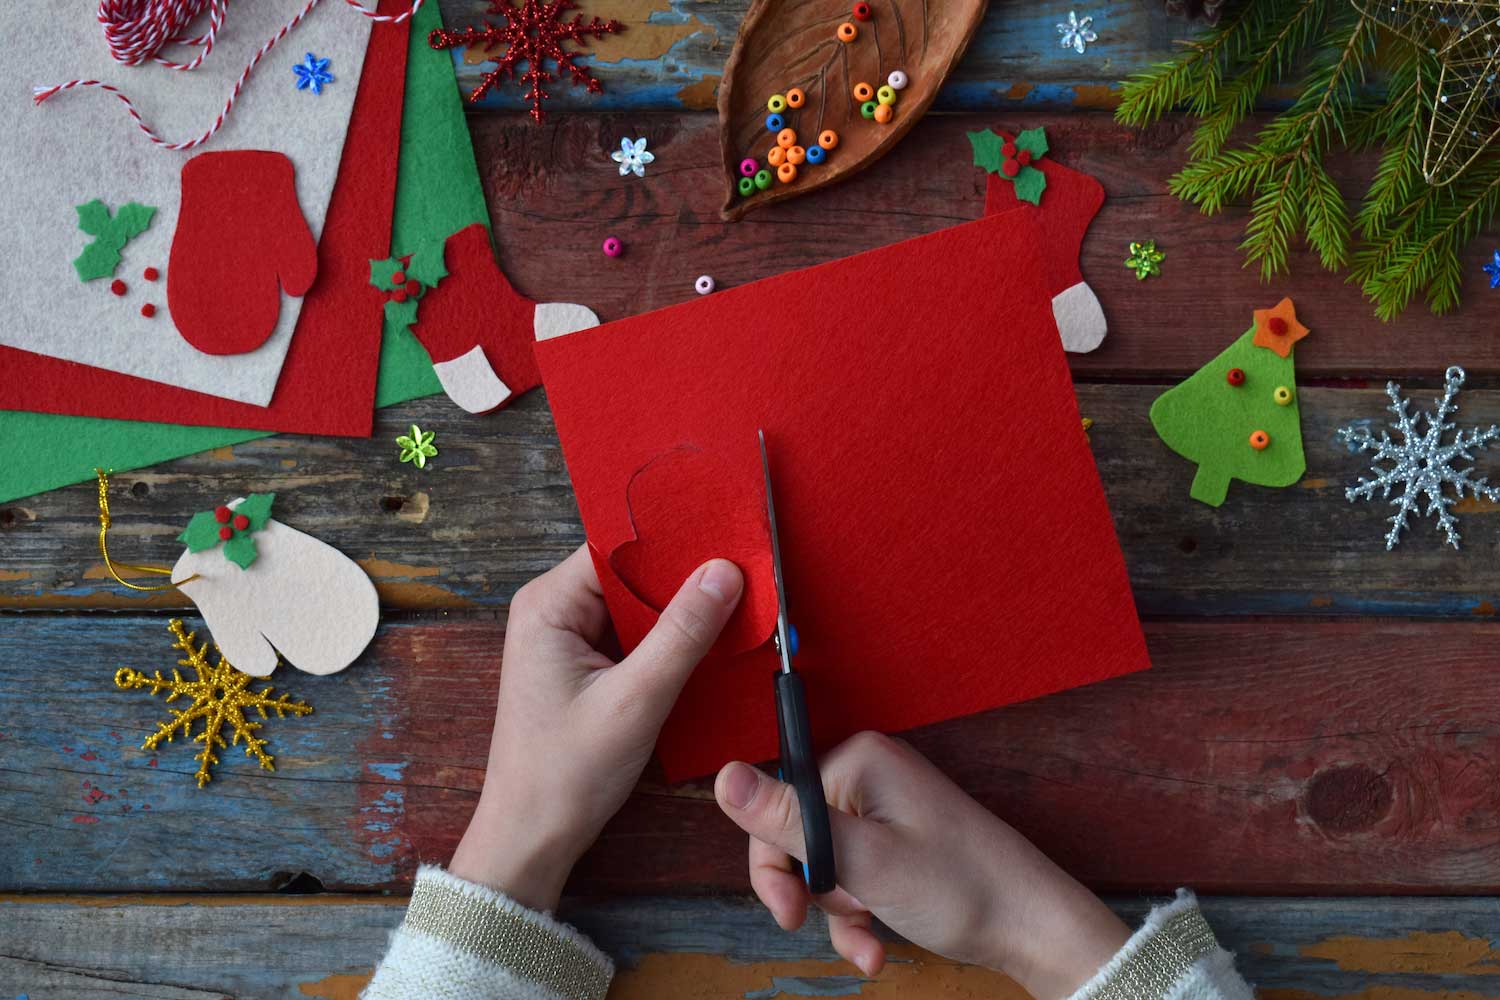 A pair of hands using scissors to cut paper amid Christmas craft supplies.